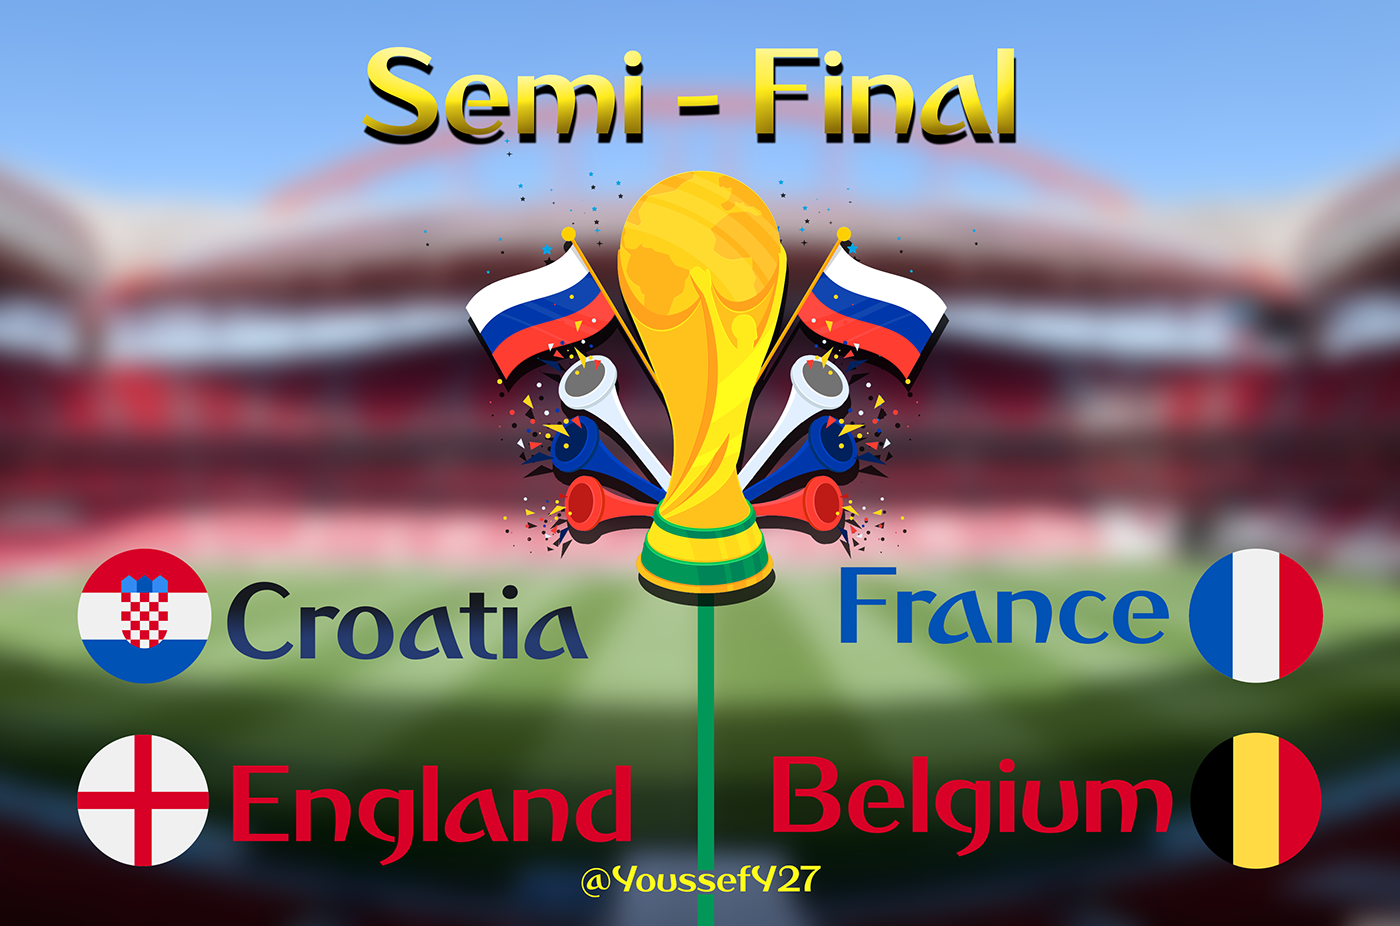 world cup FIFA world cup wc2018 knockout Stage round Russia match